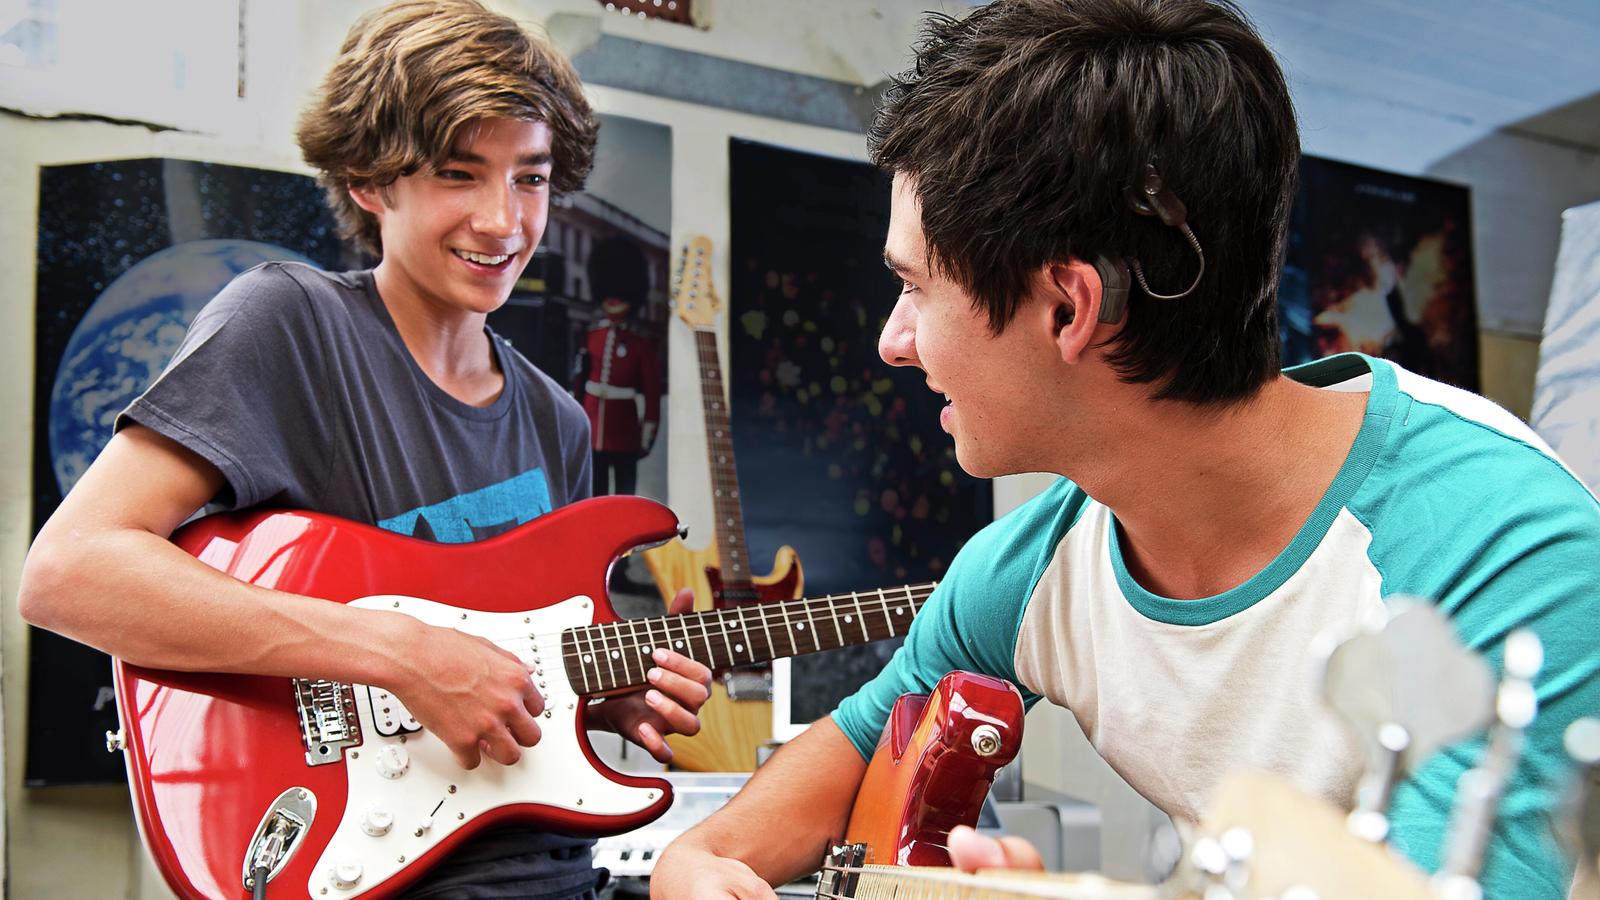 Cochlear recipient Christopher plays guitar with a friend